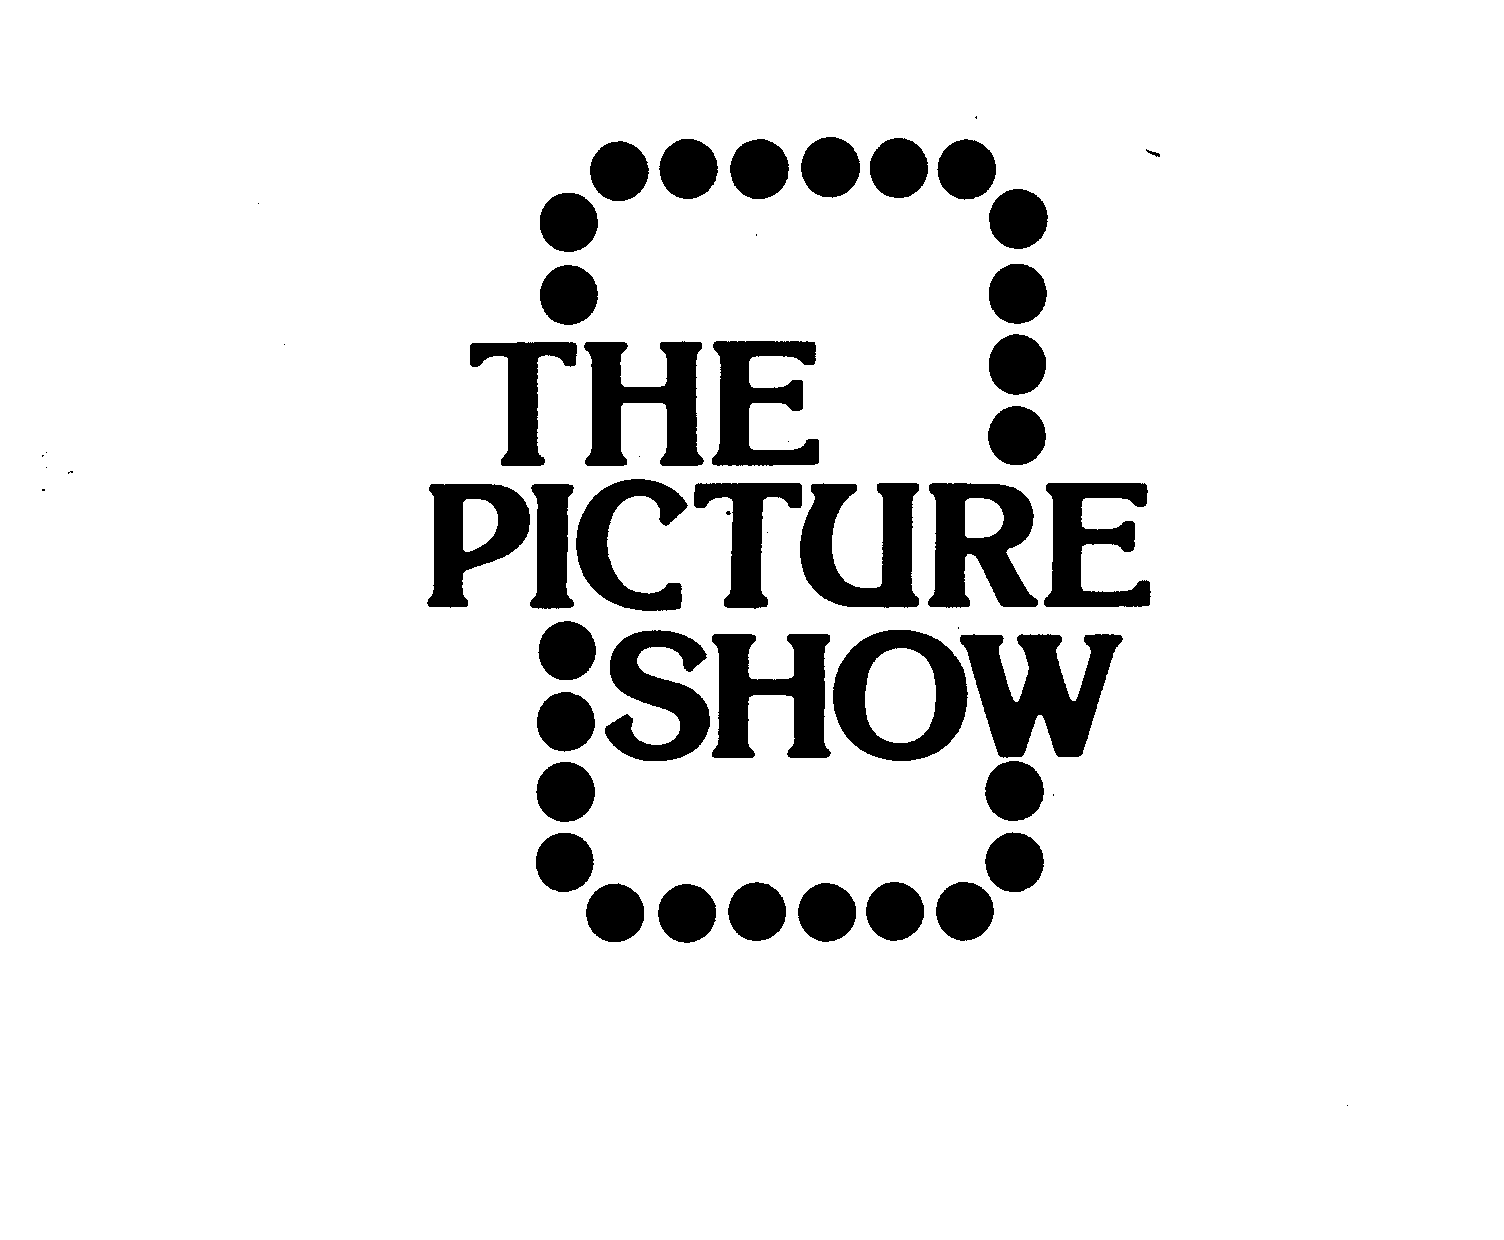  THE PICTURE SHOW